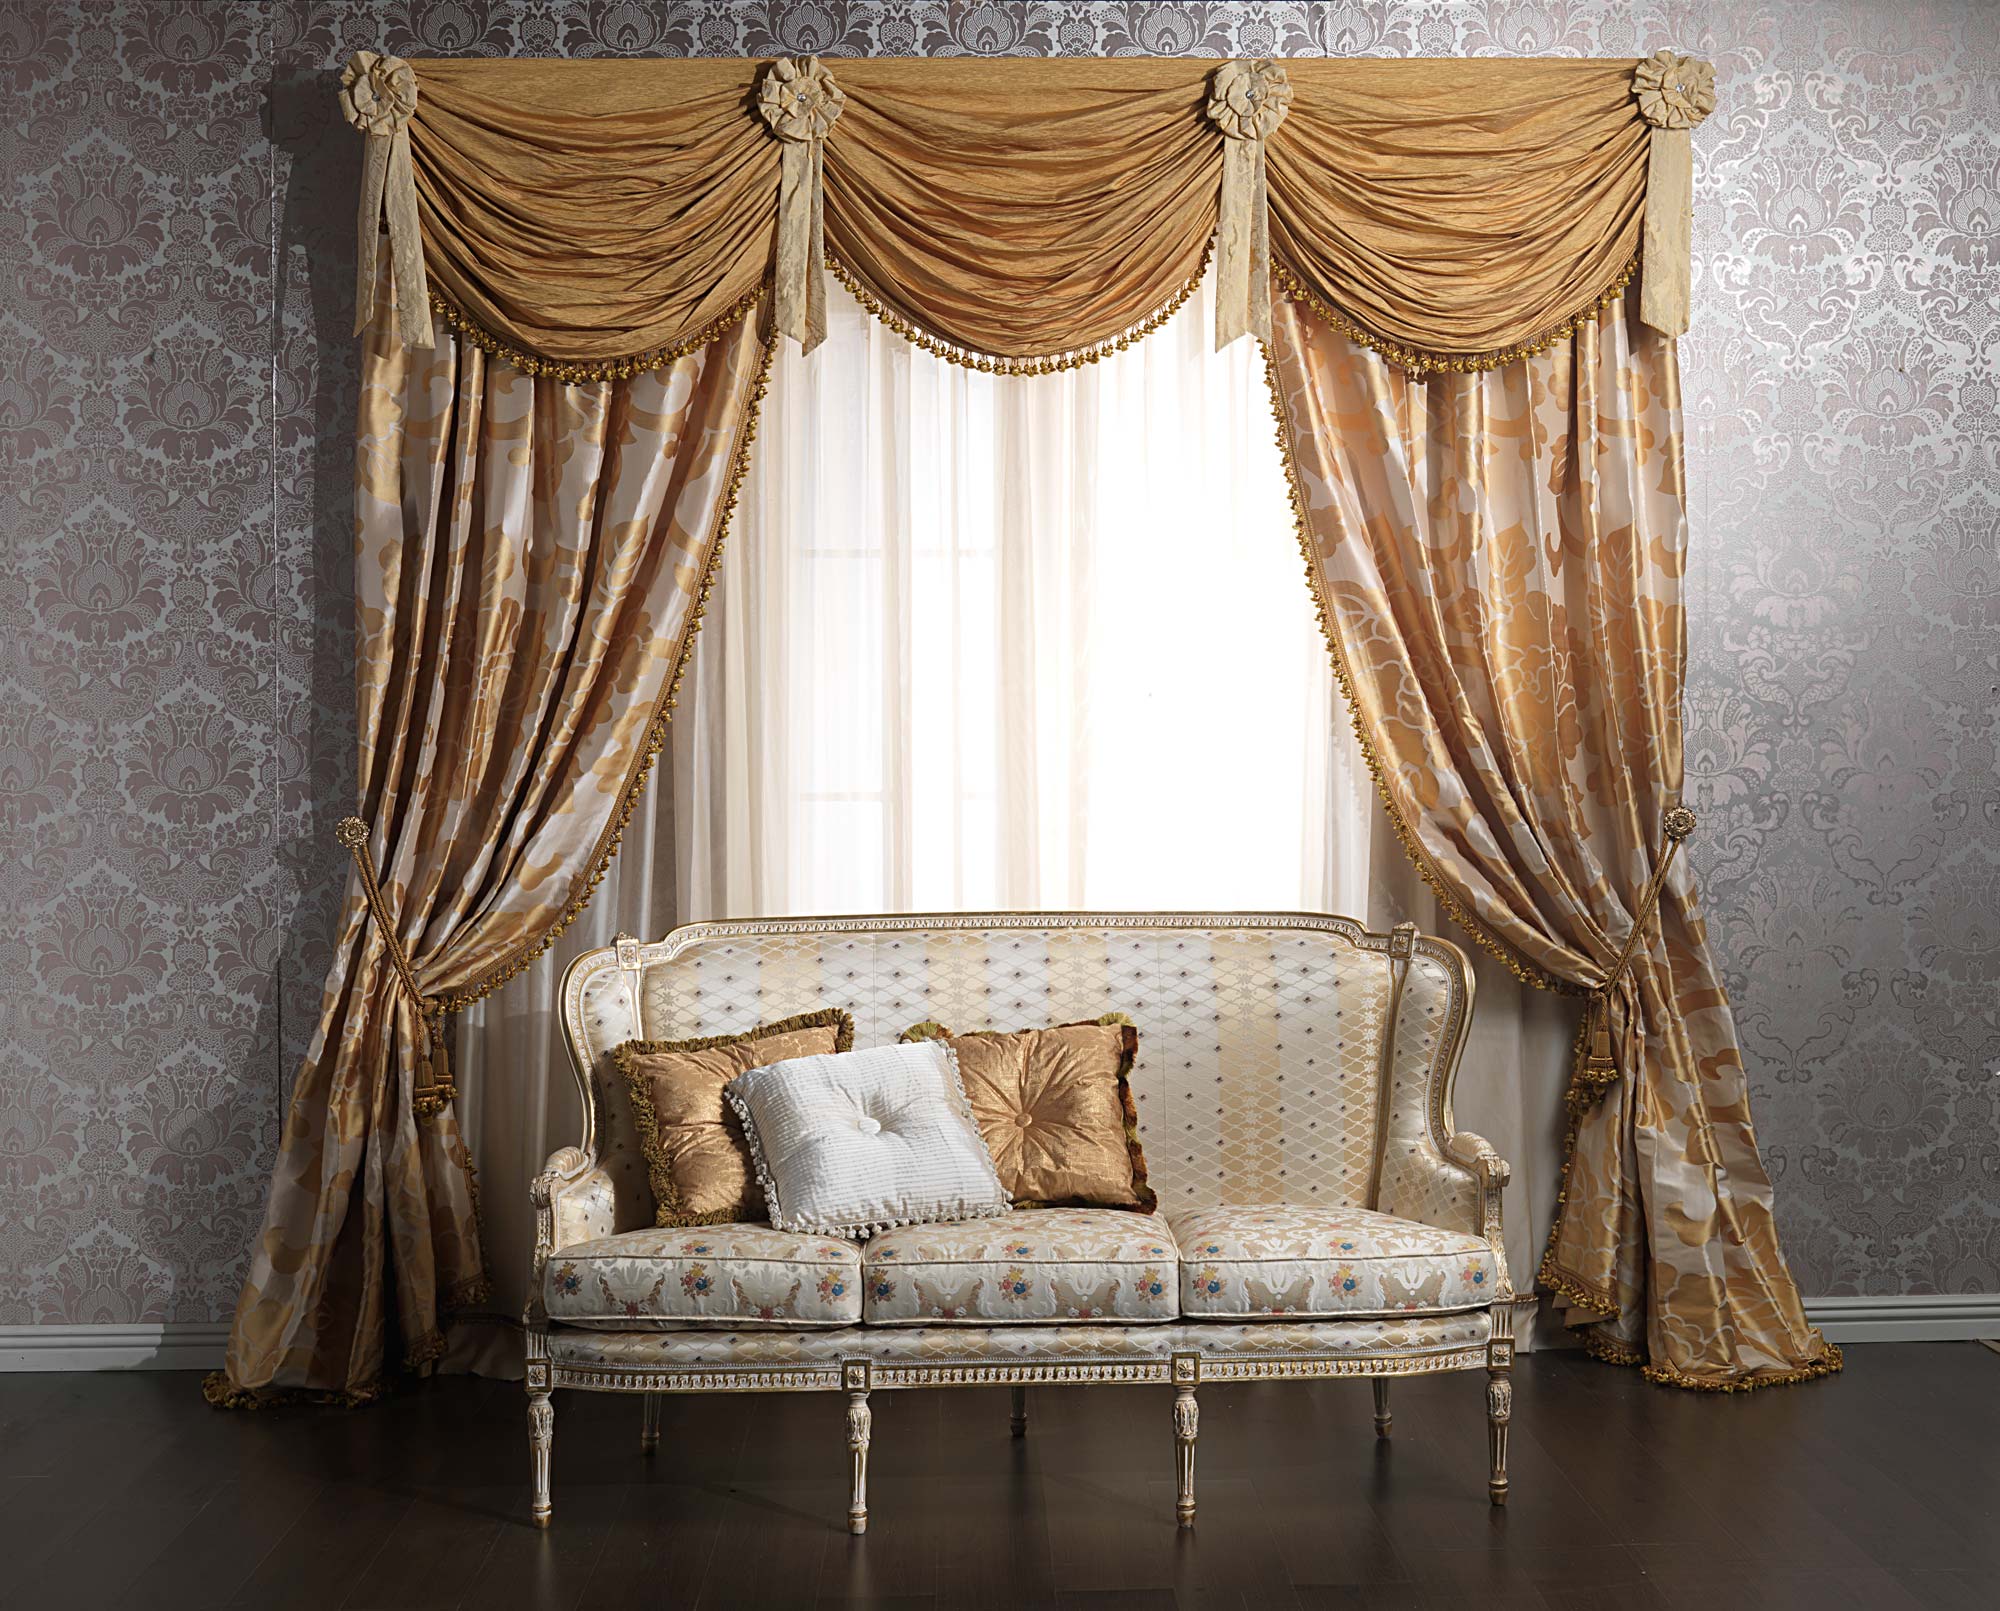 From Luxury To Budget: Curtains For Every Price Point